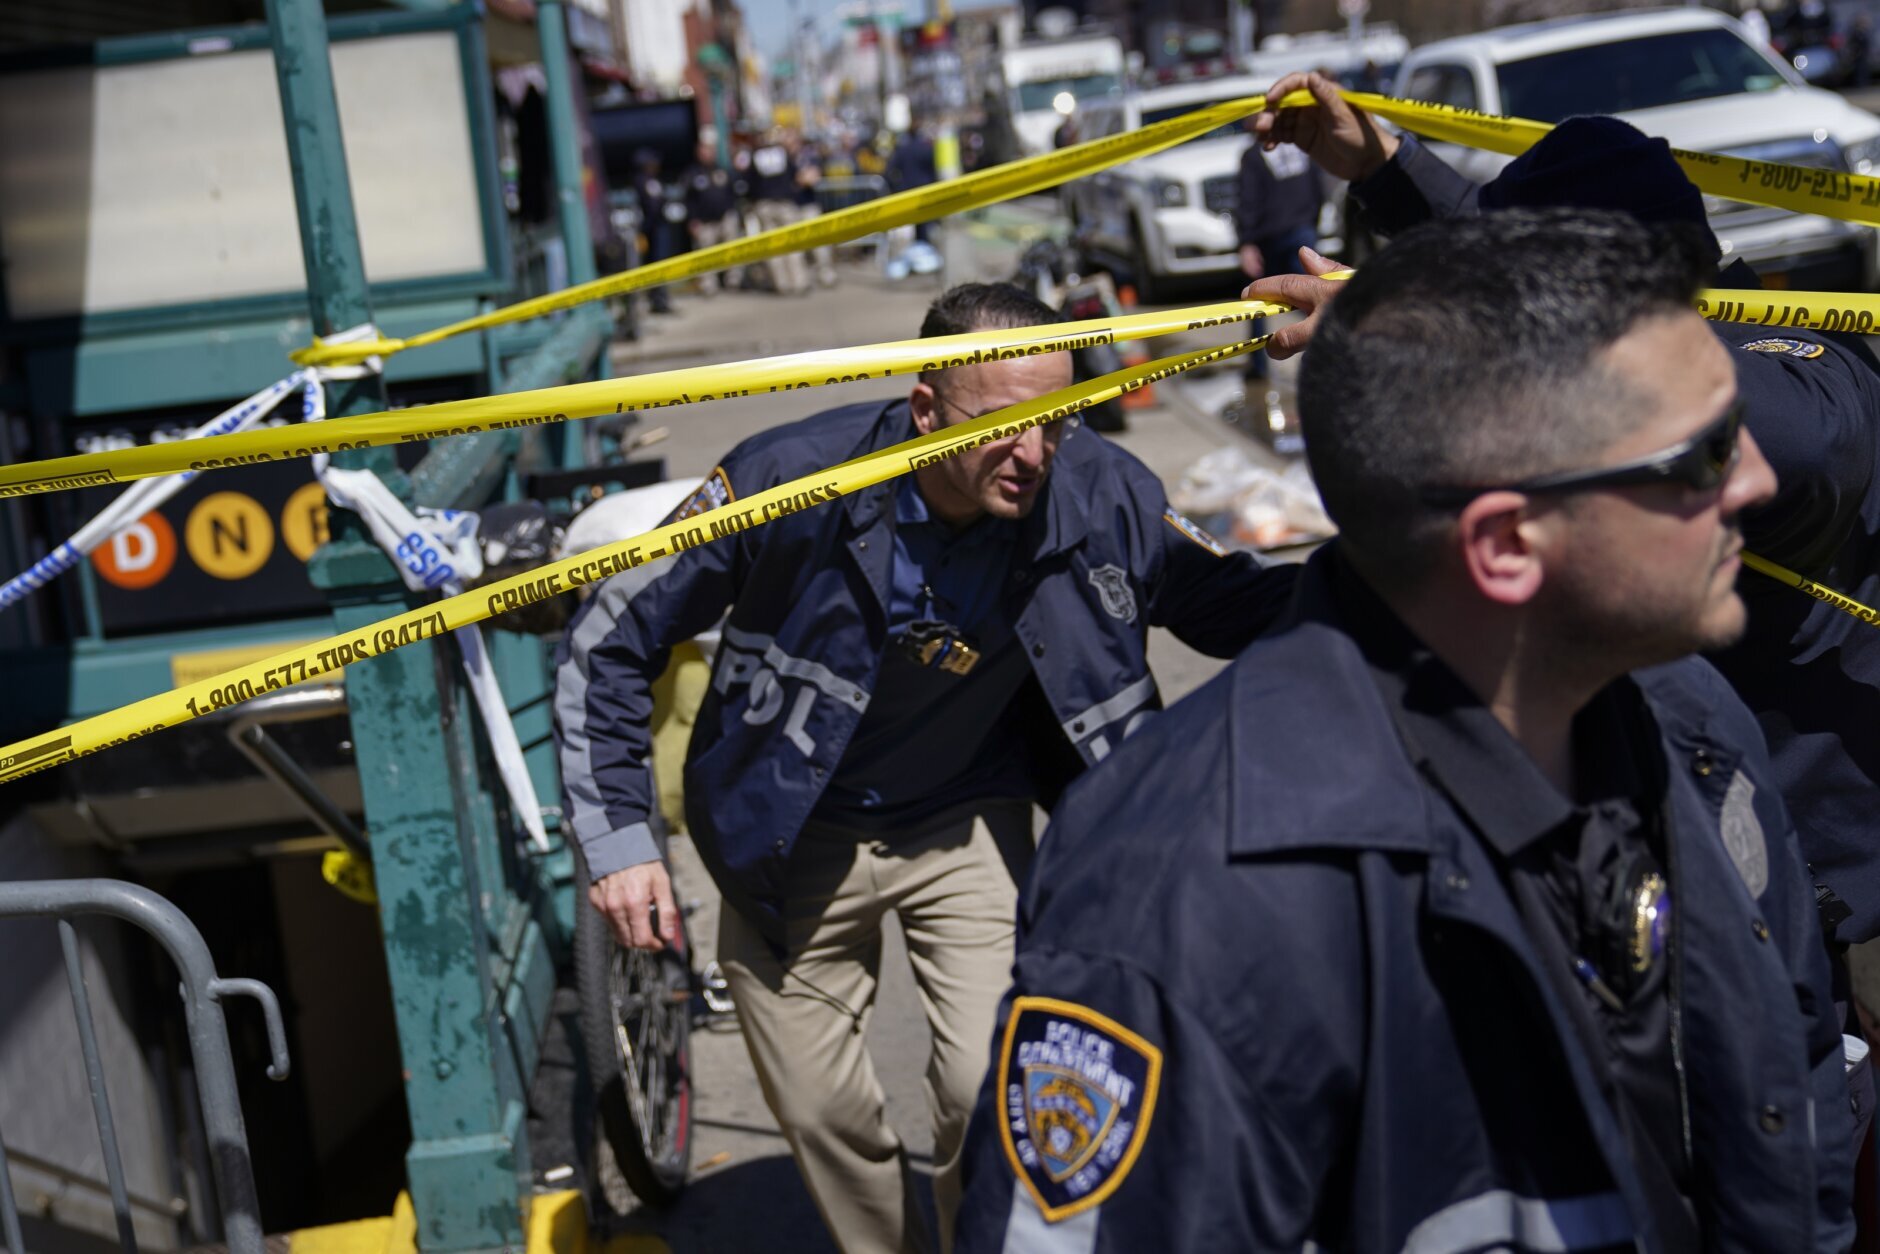 Emergency personnel gather at the entrance to a subway stop in the Brooklyn borough of New York, Tuesday, April 12, 2022. Multiple people were shot and injured Tuesday at a subway station in New York City during a morning rush hour attack that left wounded commuters bleeding on a train platform. (AP Photo/John Minchillo)